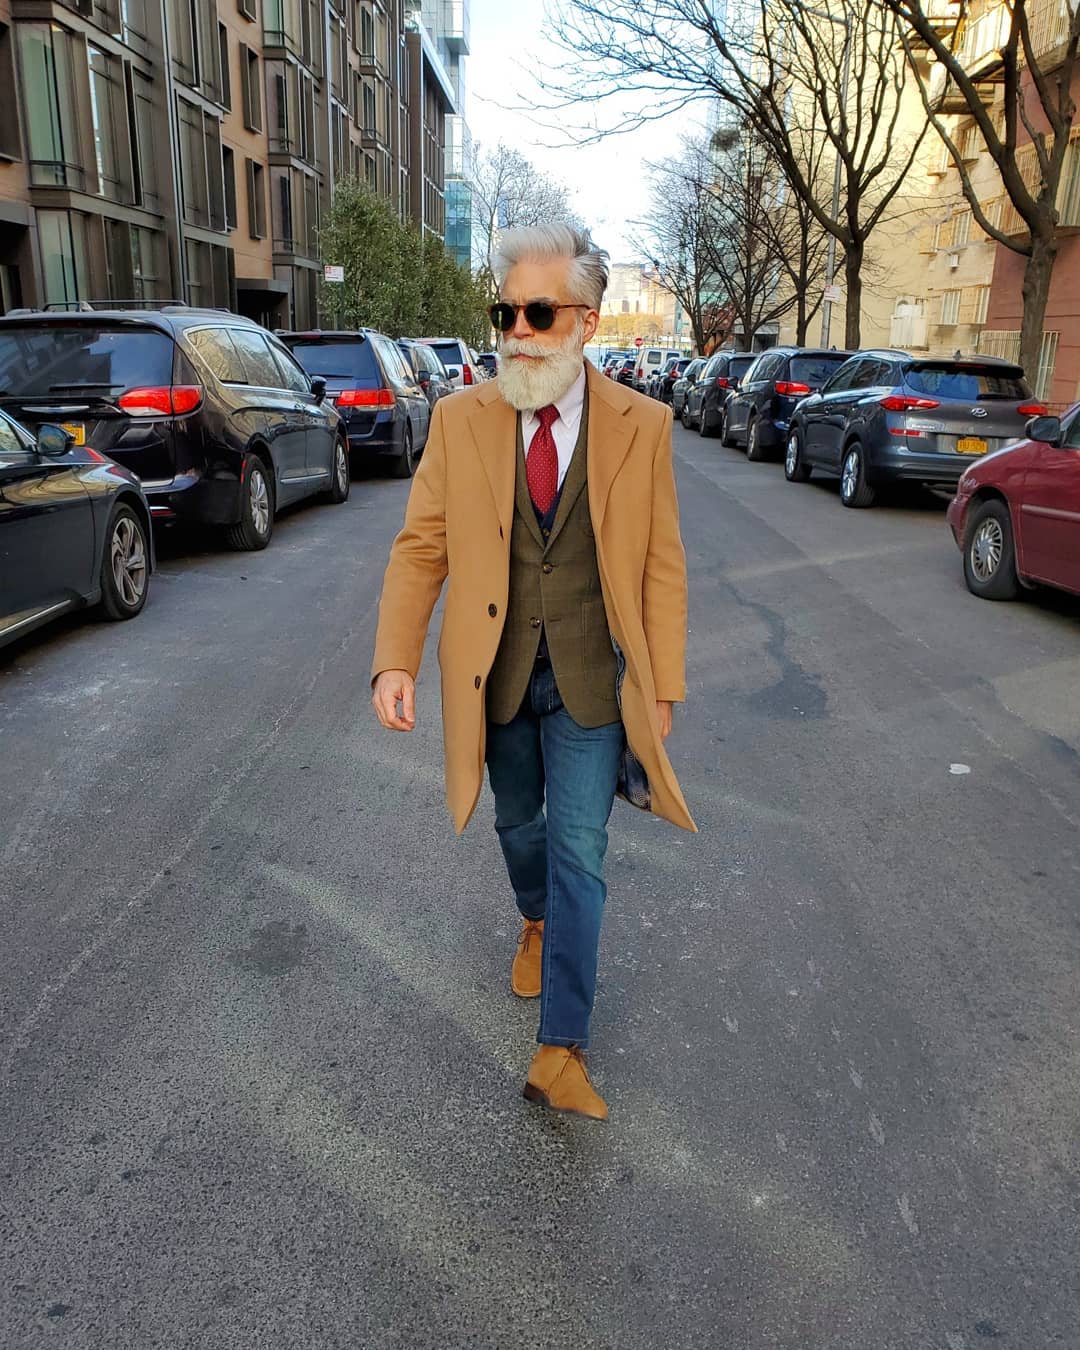 How to Dress Like an Adult (5 Easy Upgrades for Men) - The Modest Man